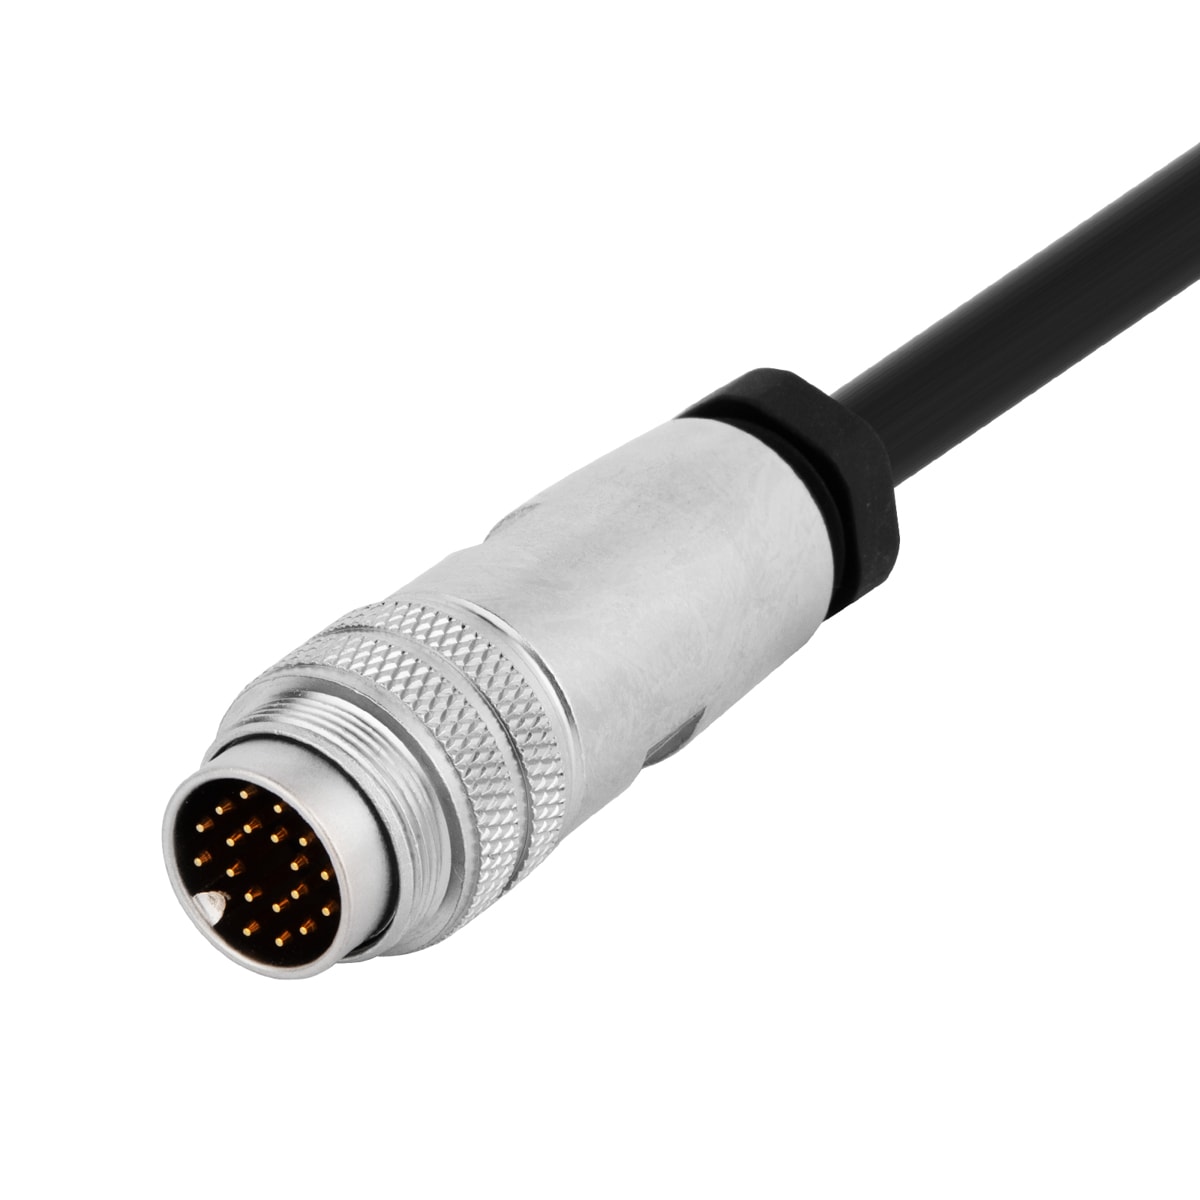 M16 cable connector, male, contacts:24,field assembly type, solder connection, straight, IP67, UL certified